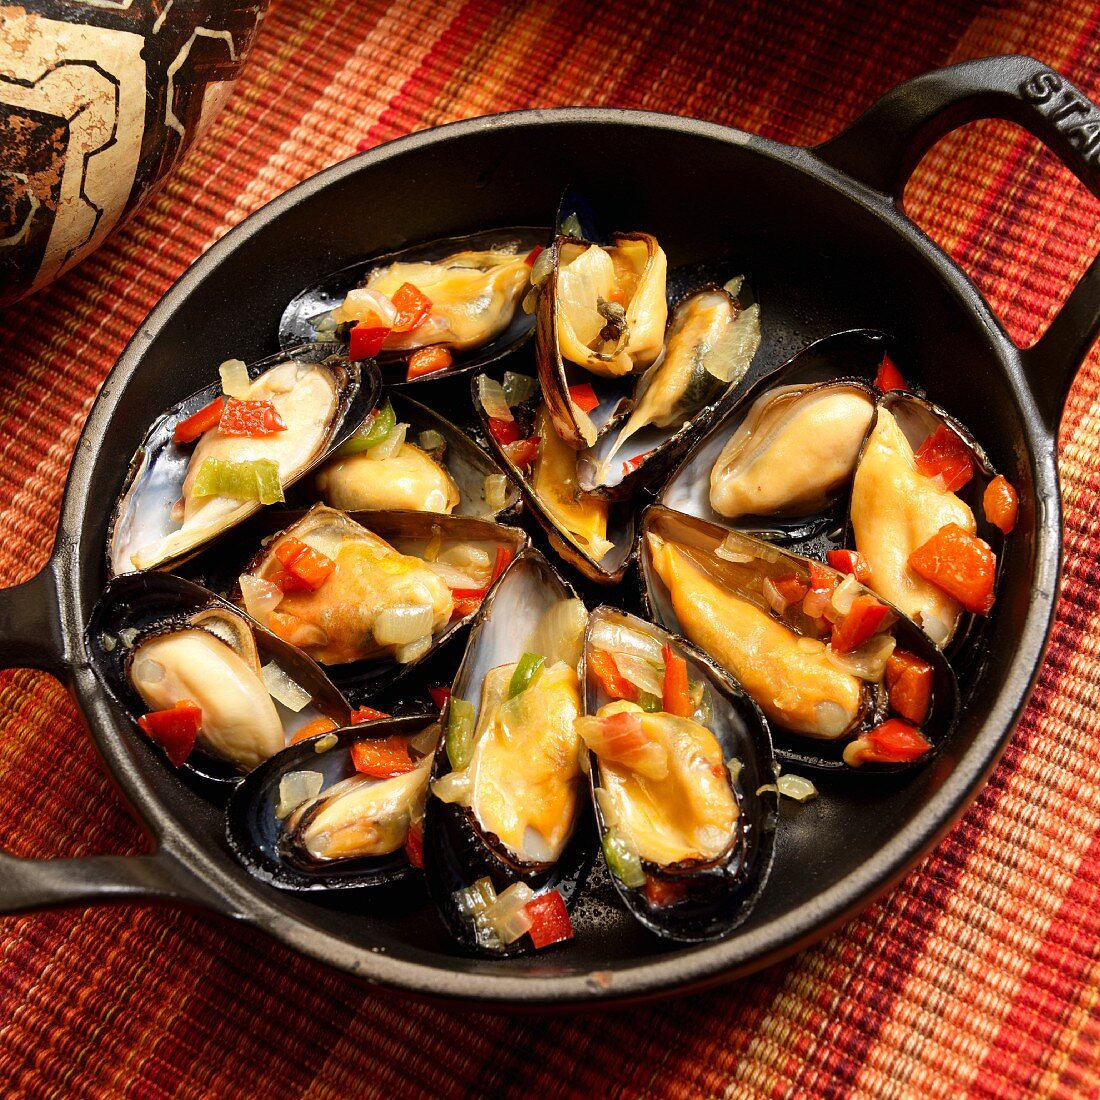 Mejillones y pimientas (mussels with jalapeños, onion, garlic, peppers, wine and olive oil, Spain)